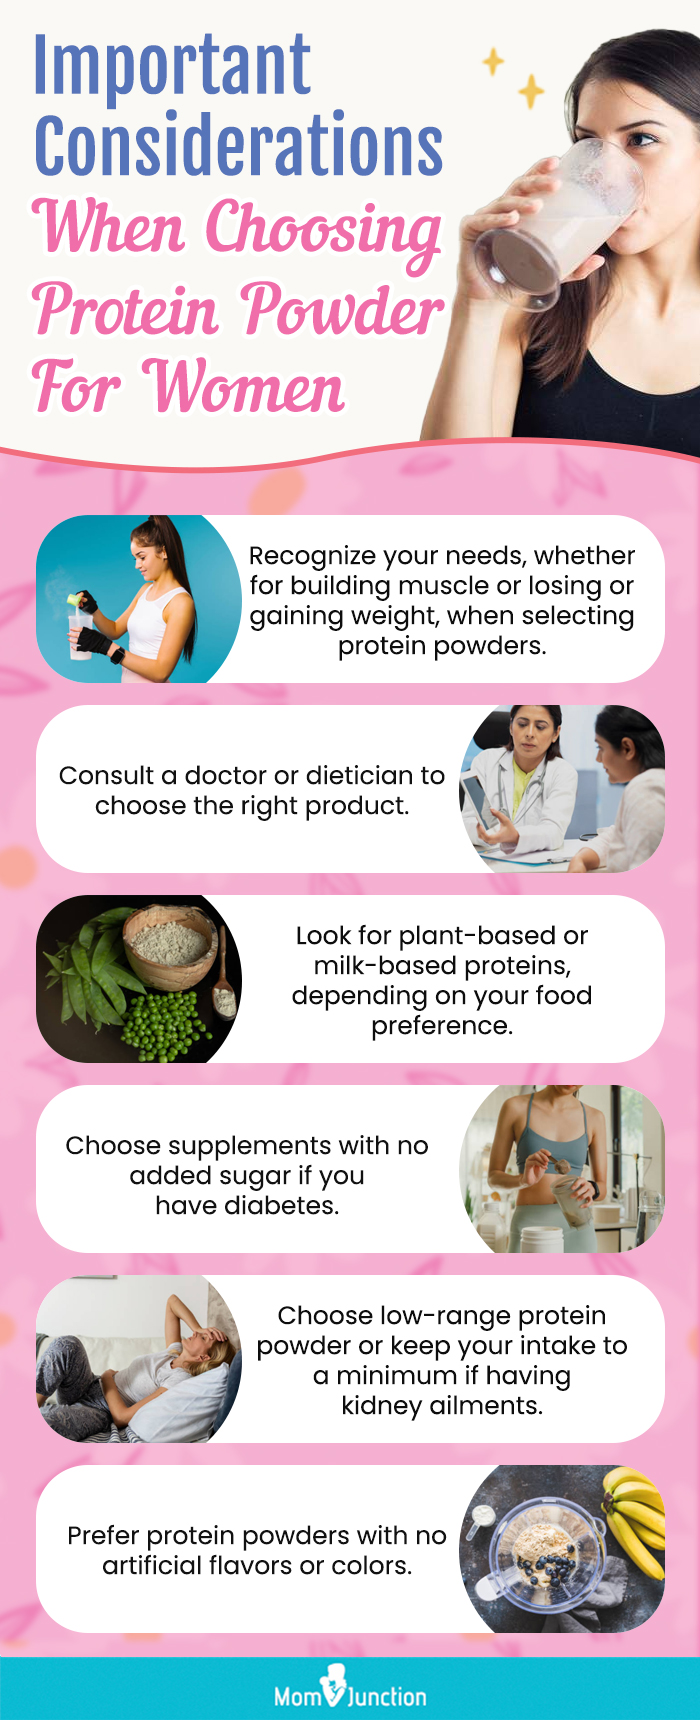 Important Considerations When Choosing Protein Powder For Women (infographic)